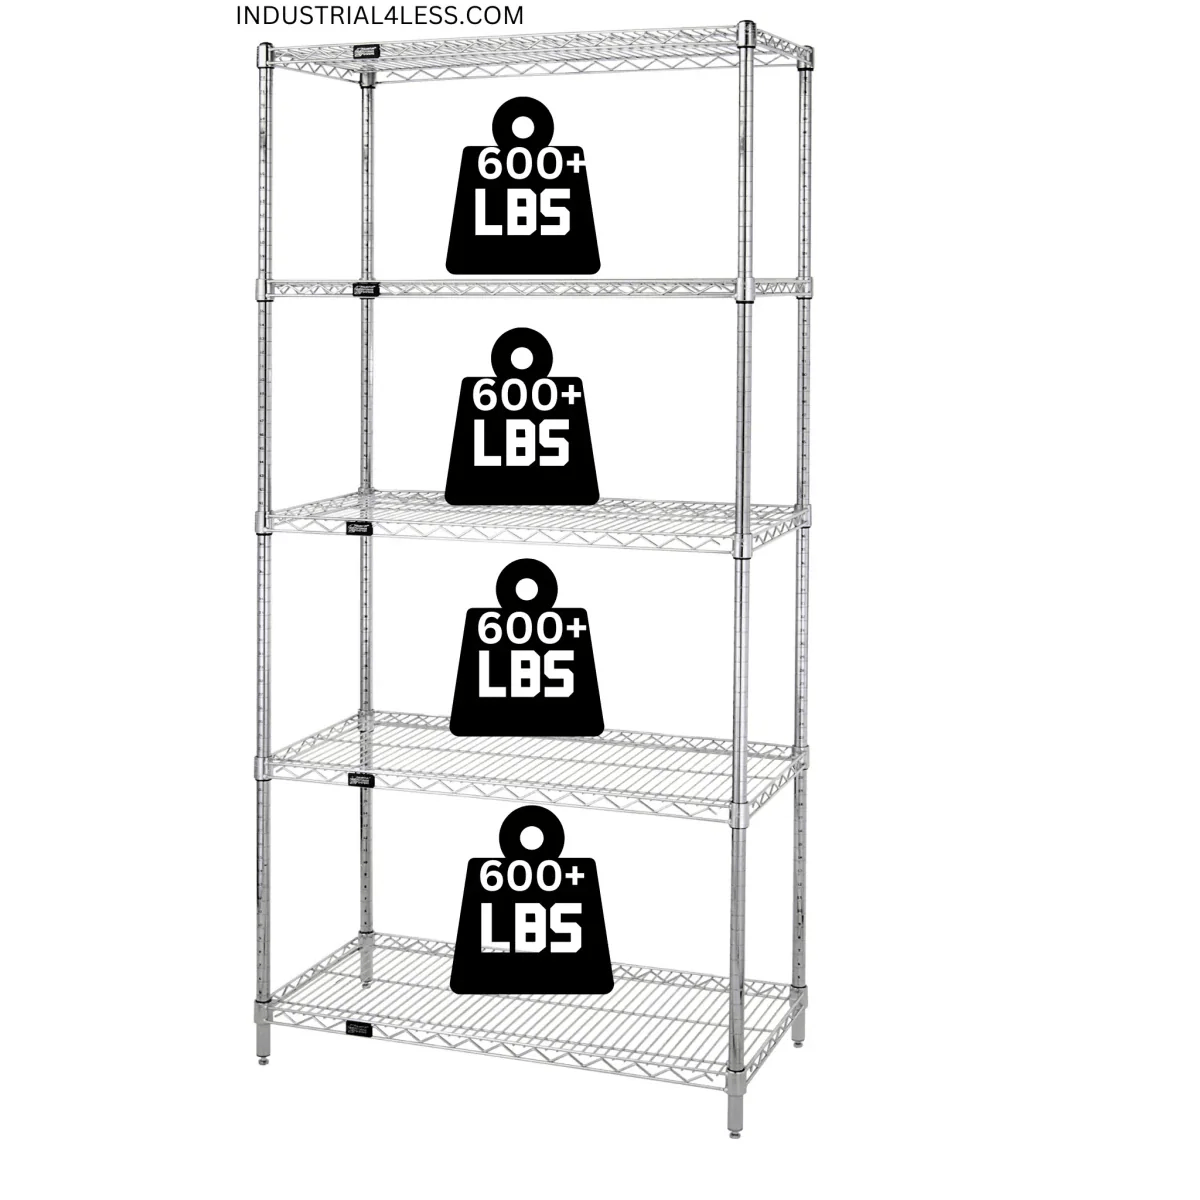 14" x 30" Stainless Steel Wire Shelving Unit - Industrial 4 Less - 14305S-5